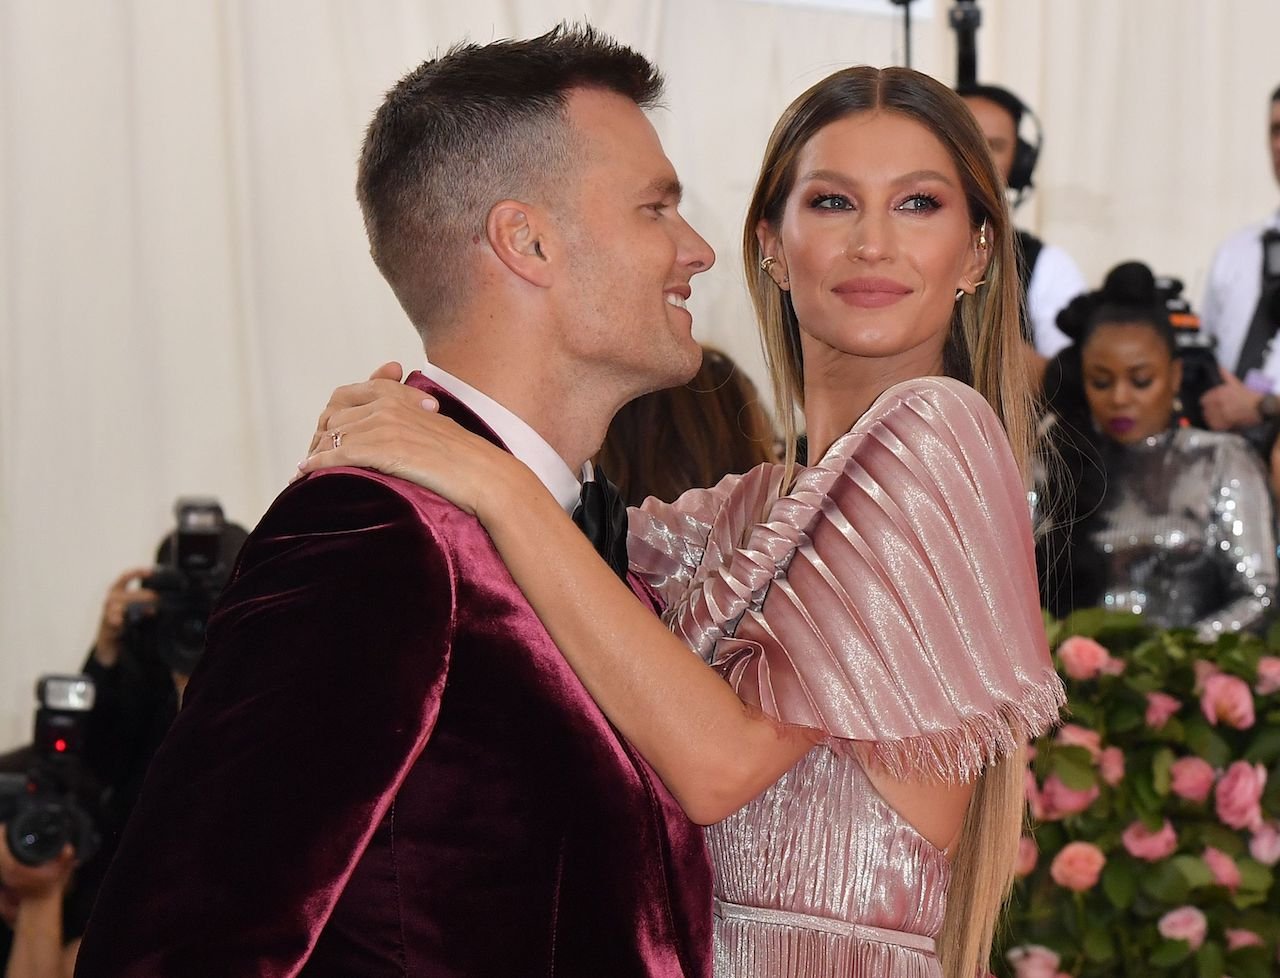 Gisele Bundchen and Tom Brady, pictured at the 2019 Met Gala, are reportedly considering ending their marriage.